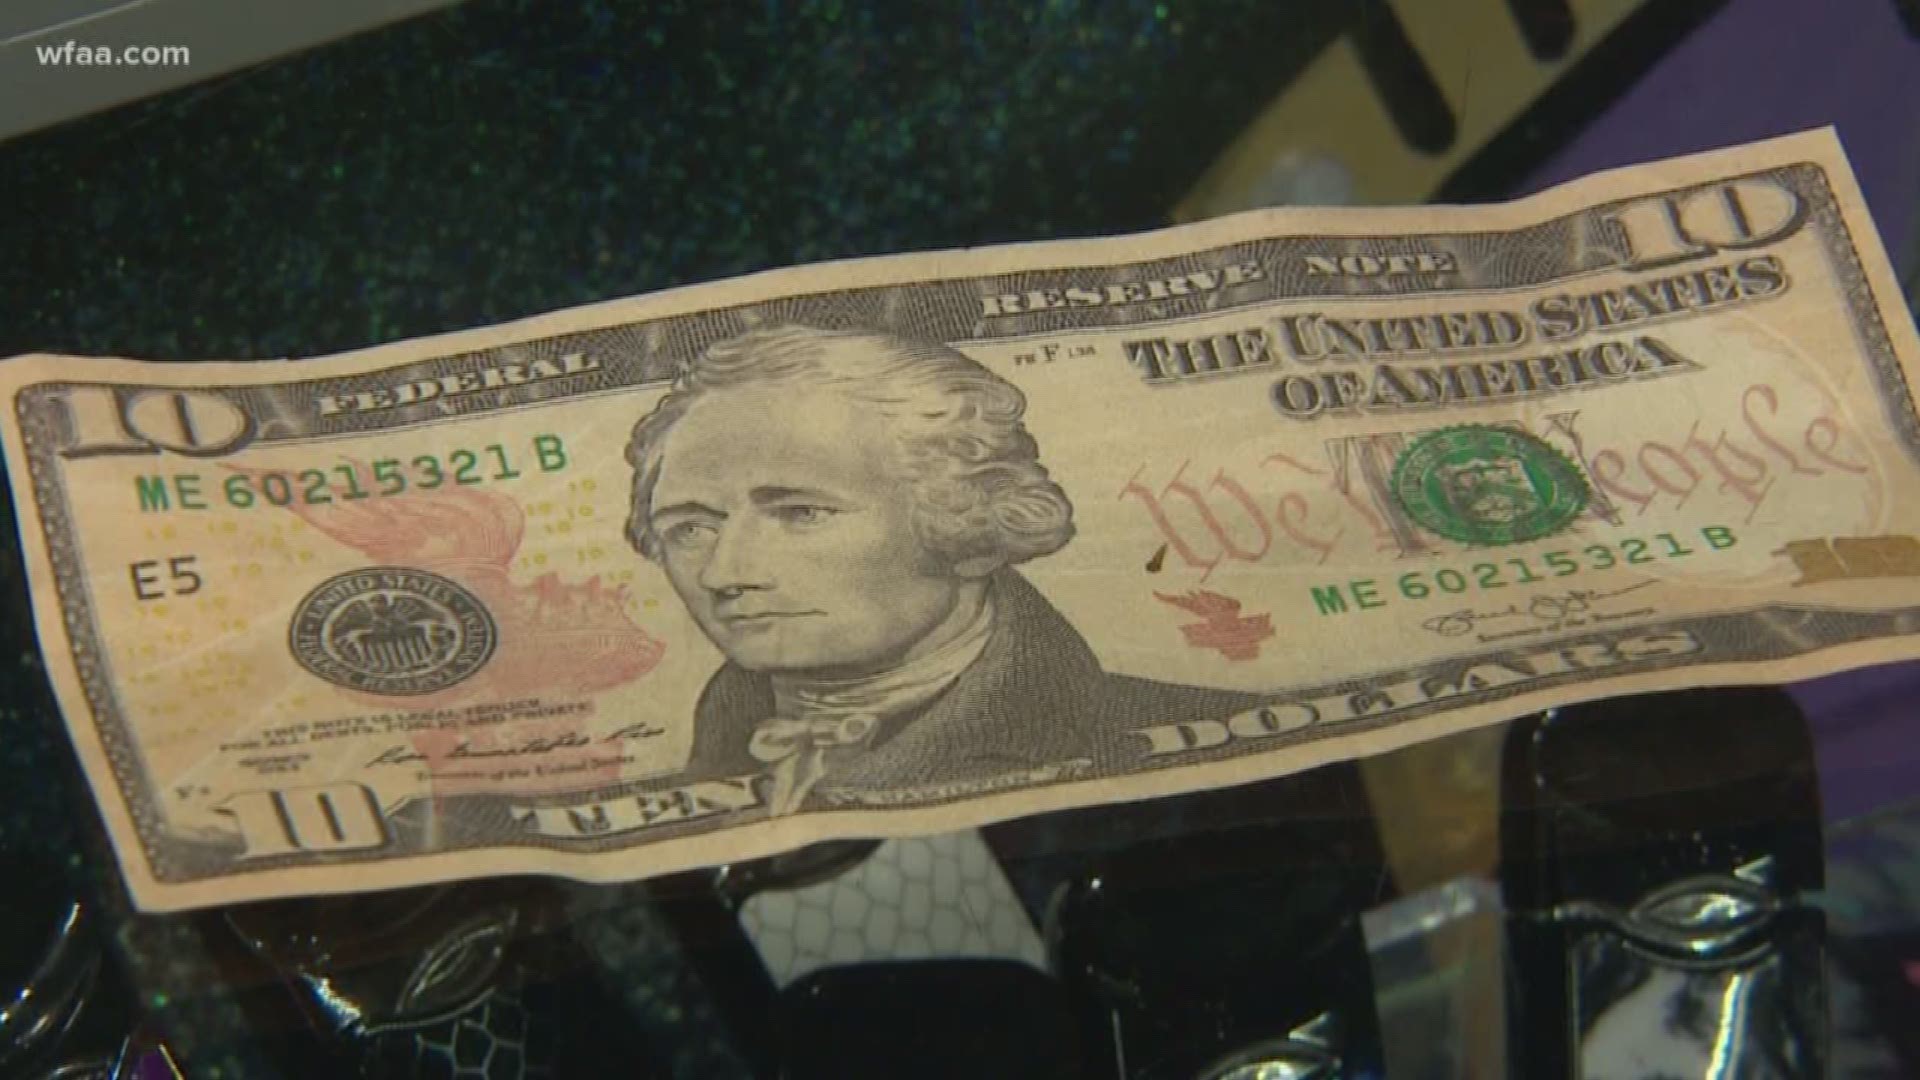 Two different businesses in separate neighborhoods were offered counterfeit money in one week. Dallas police get reports of fake money nearly once a day.